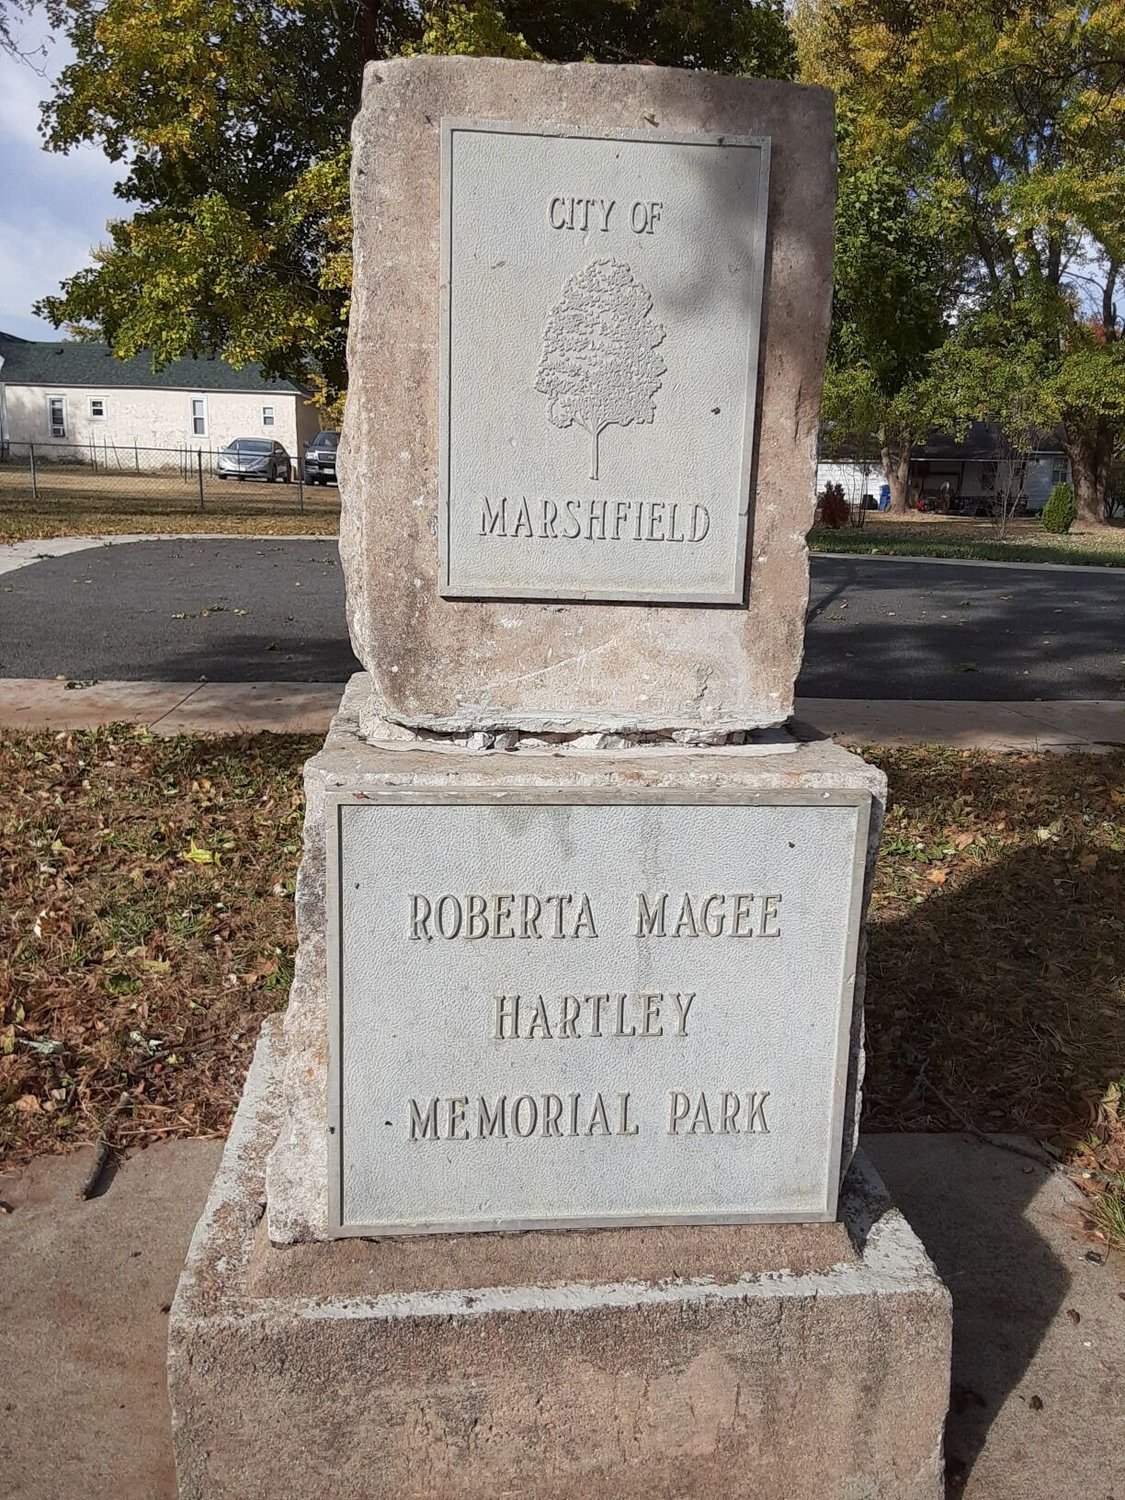 Monuments in Roberta Magee Hartley Memorial Park and Site of Original Cemetery in Marshfield showing need for resealing.


Contributed Photo by Linda Blazer